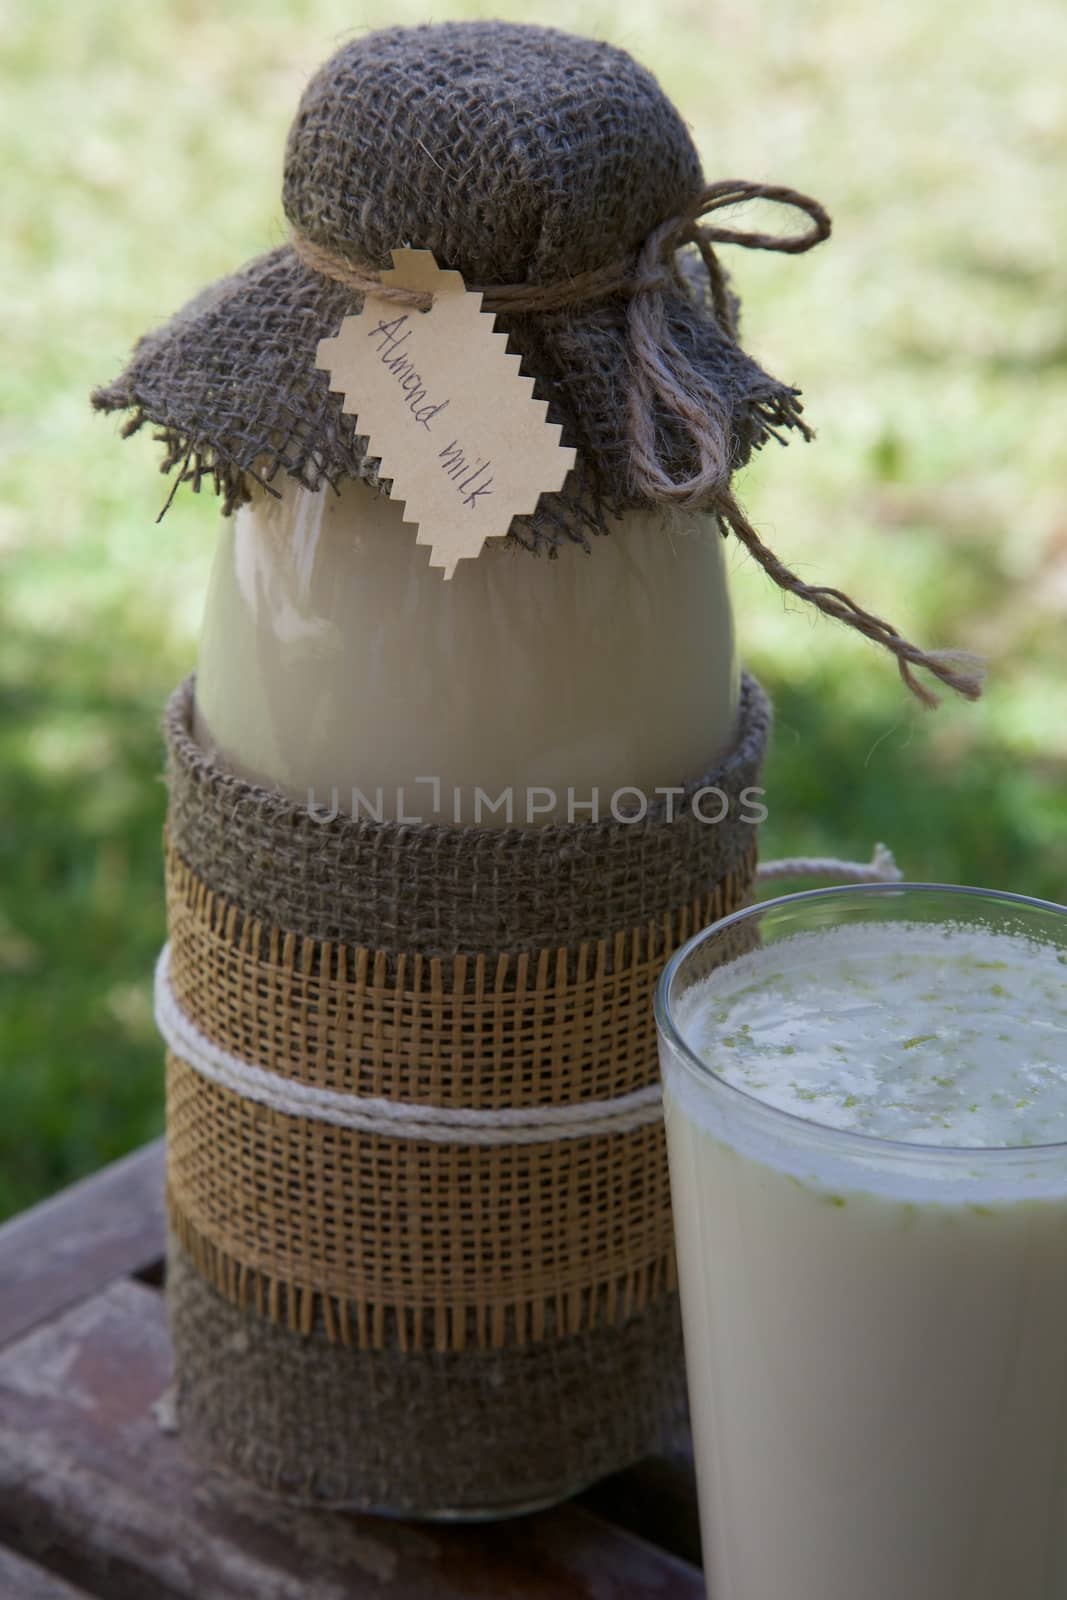 Homemade almond milk in the bottle by tolikoff_photography